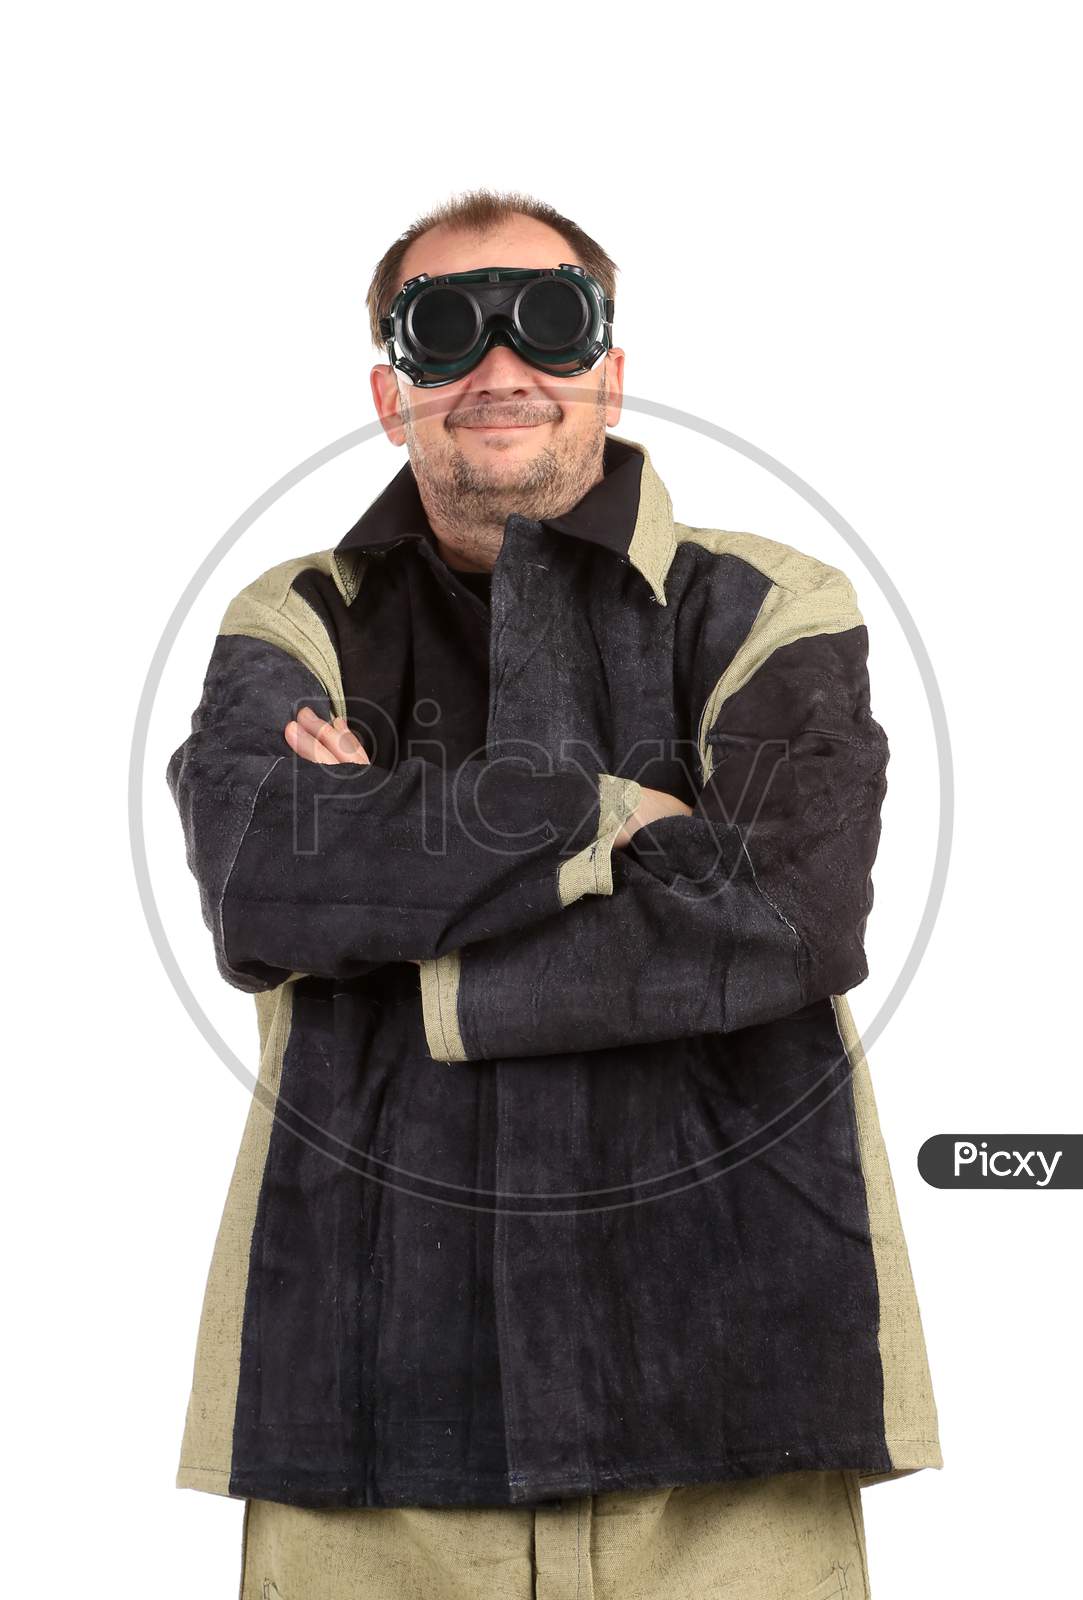 Confident Welder In Glasses. Isolated On A White Background.